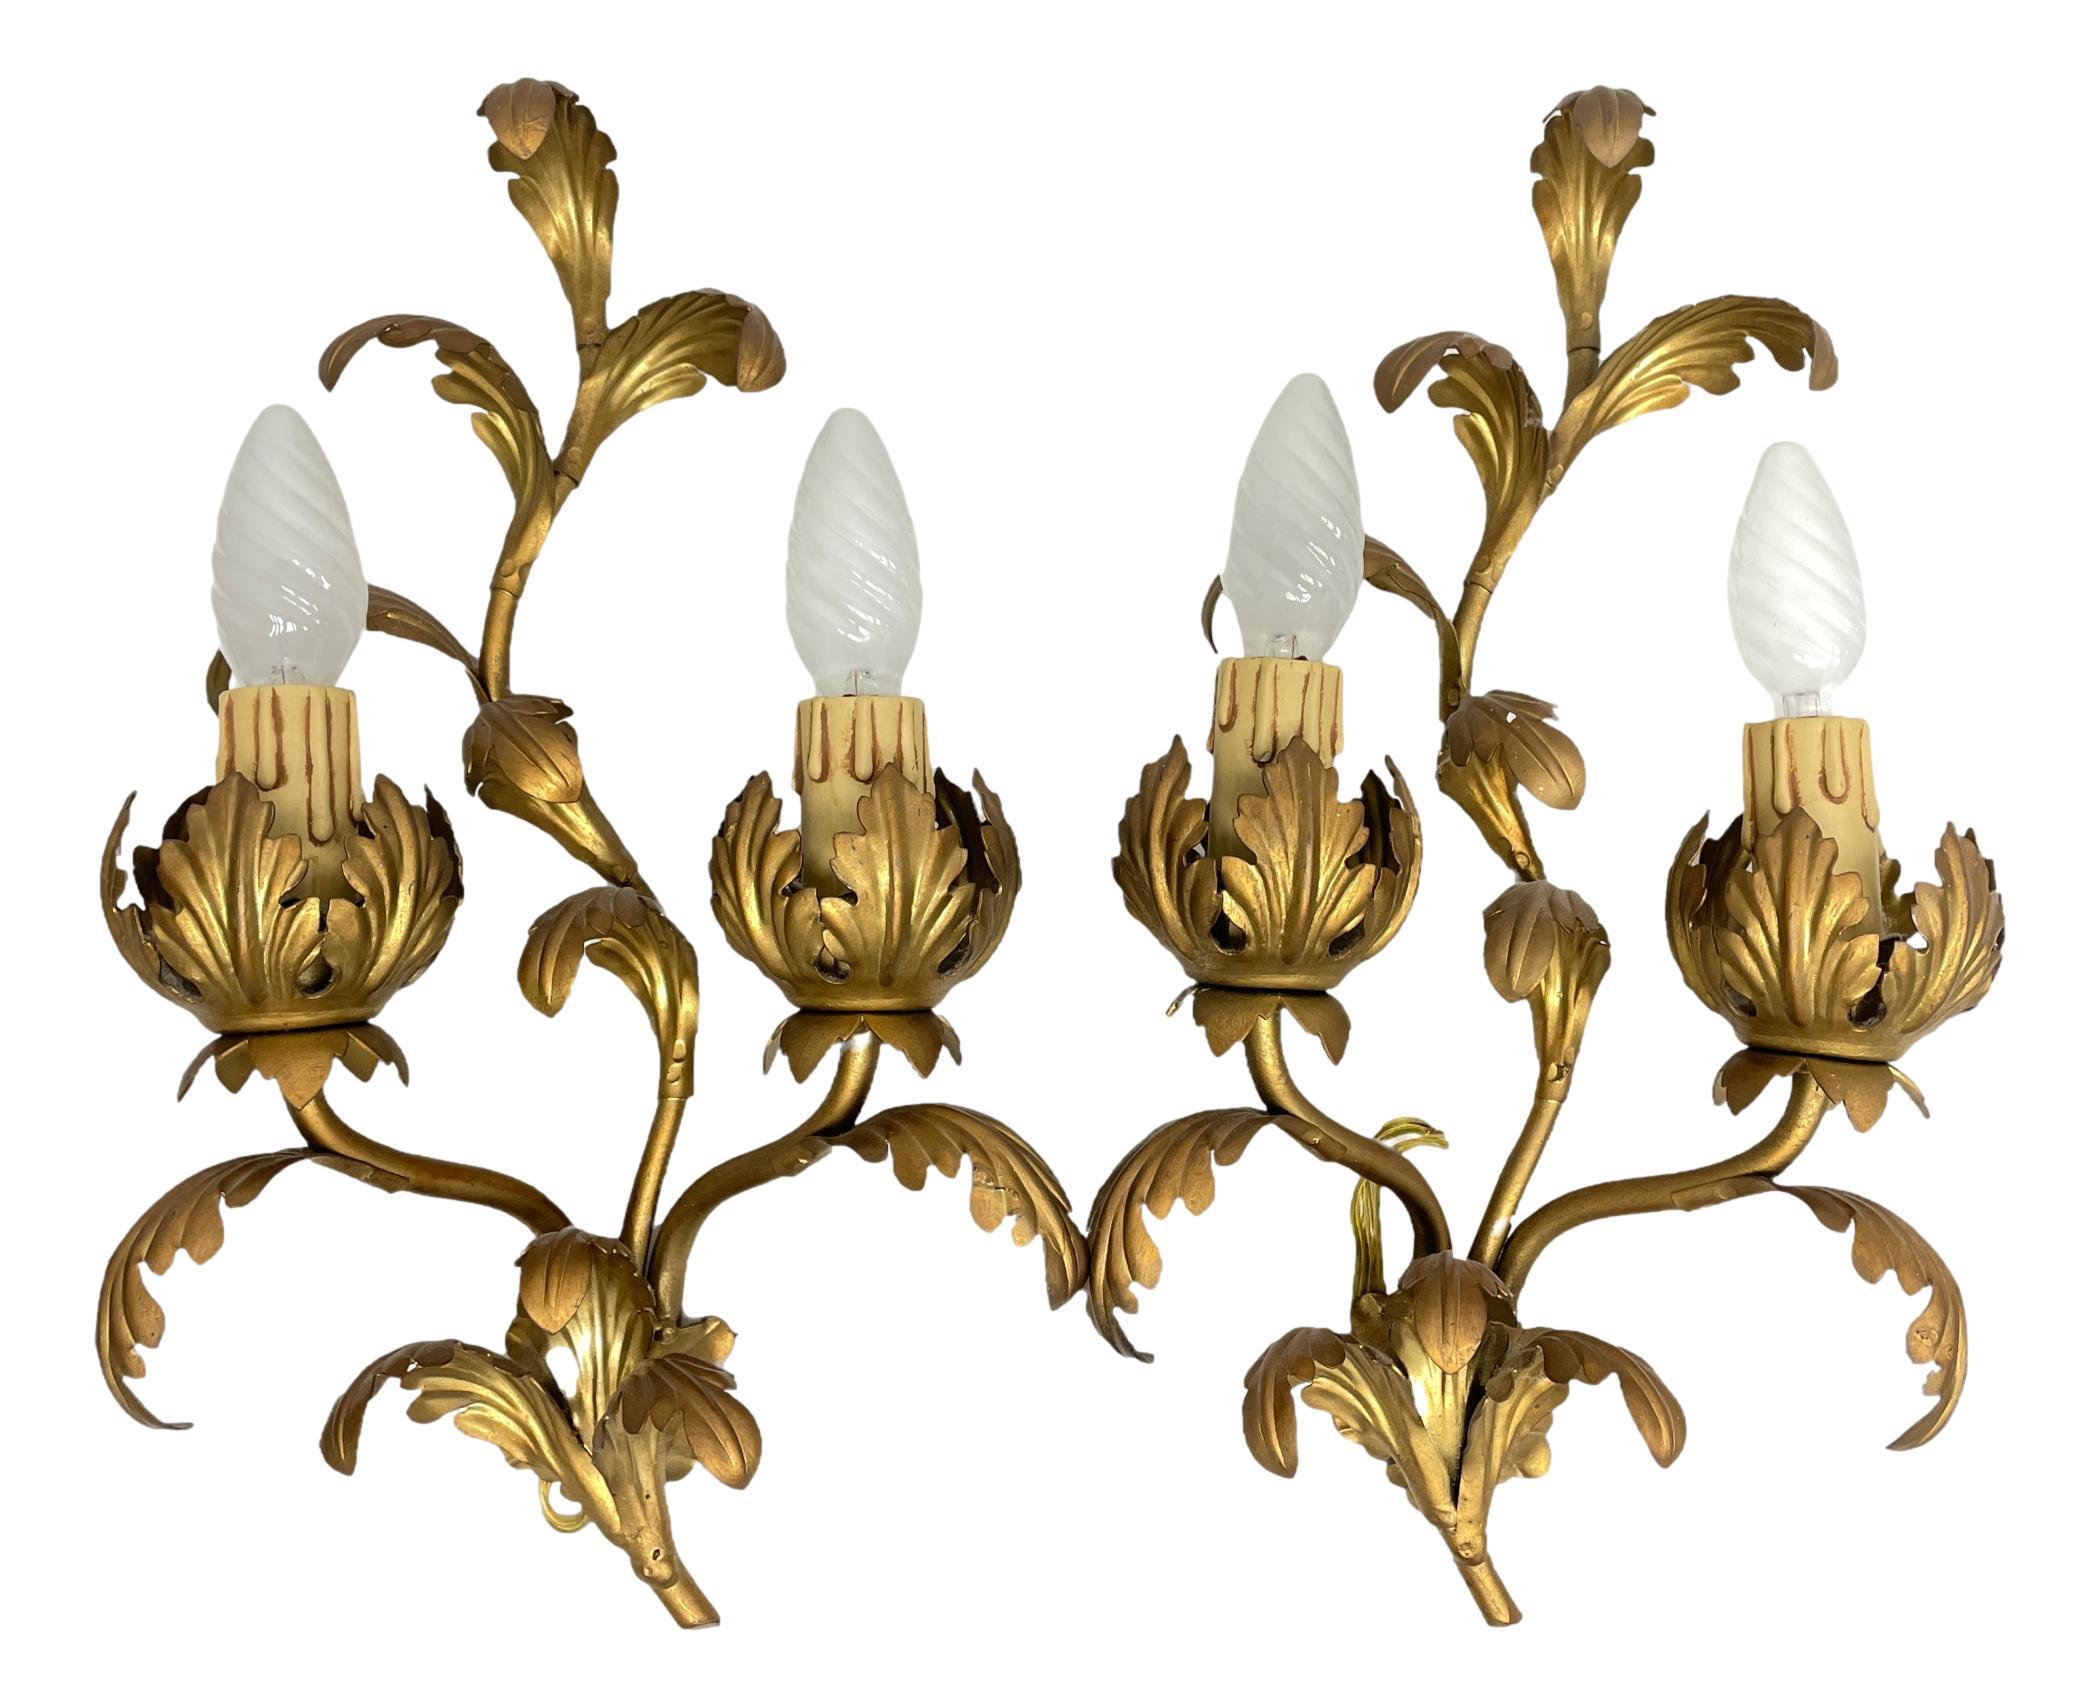 A beautiful pair Hollywood Regency midcentury gilt tole leaf sconces, each fixture requires two European E14 candelabra bulbs, each bulb up to 40 watts. The wall lights have a beautiful patina and give each room an eclectic statement. Lightbulbs